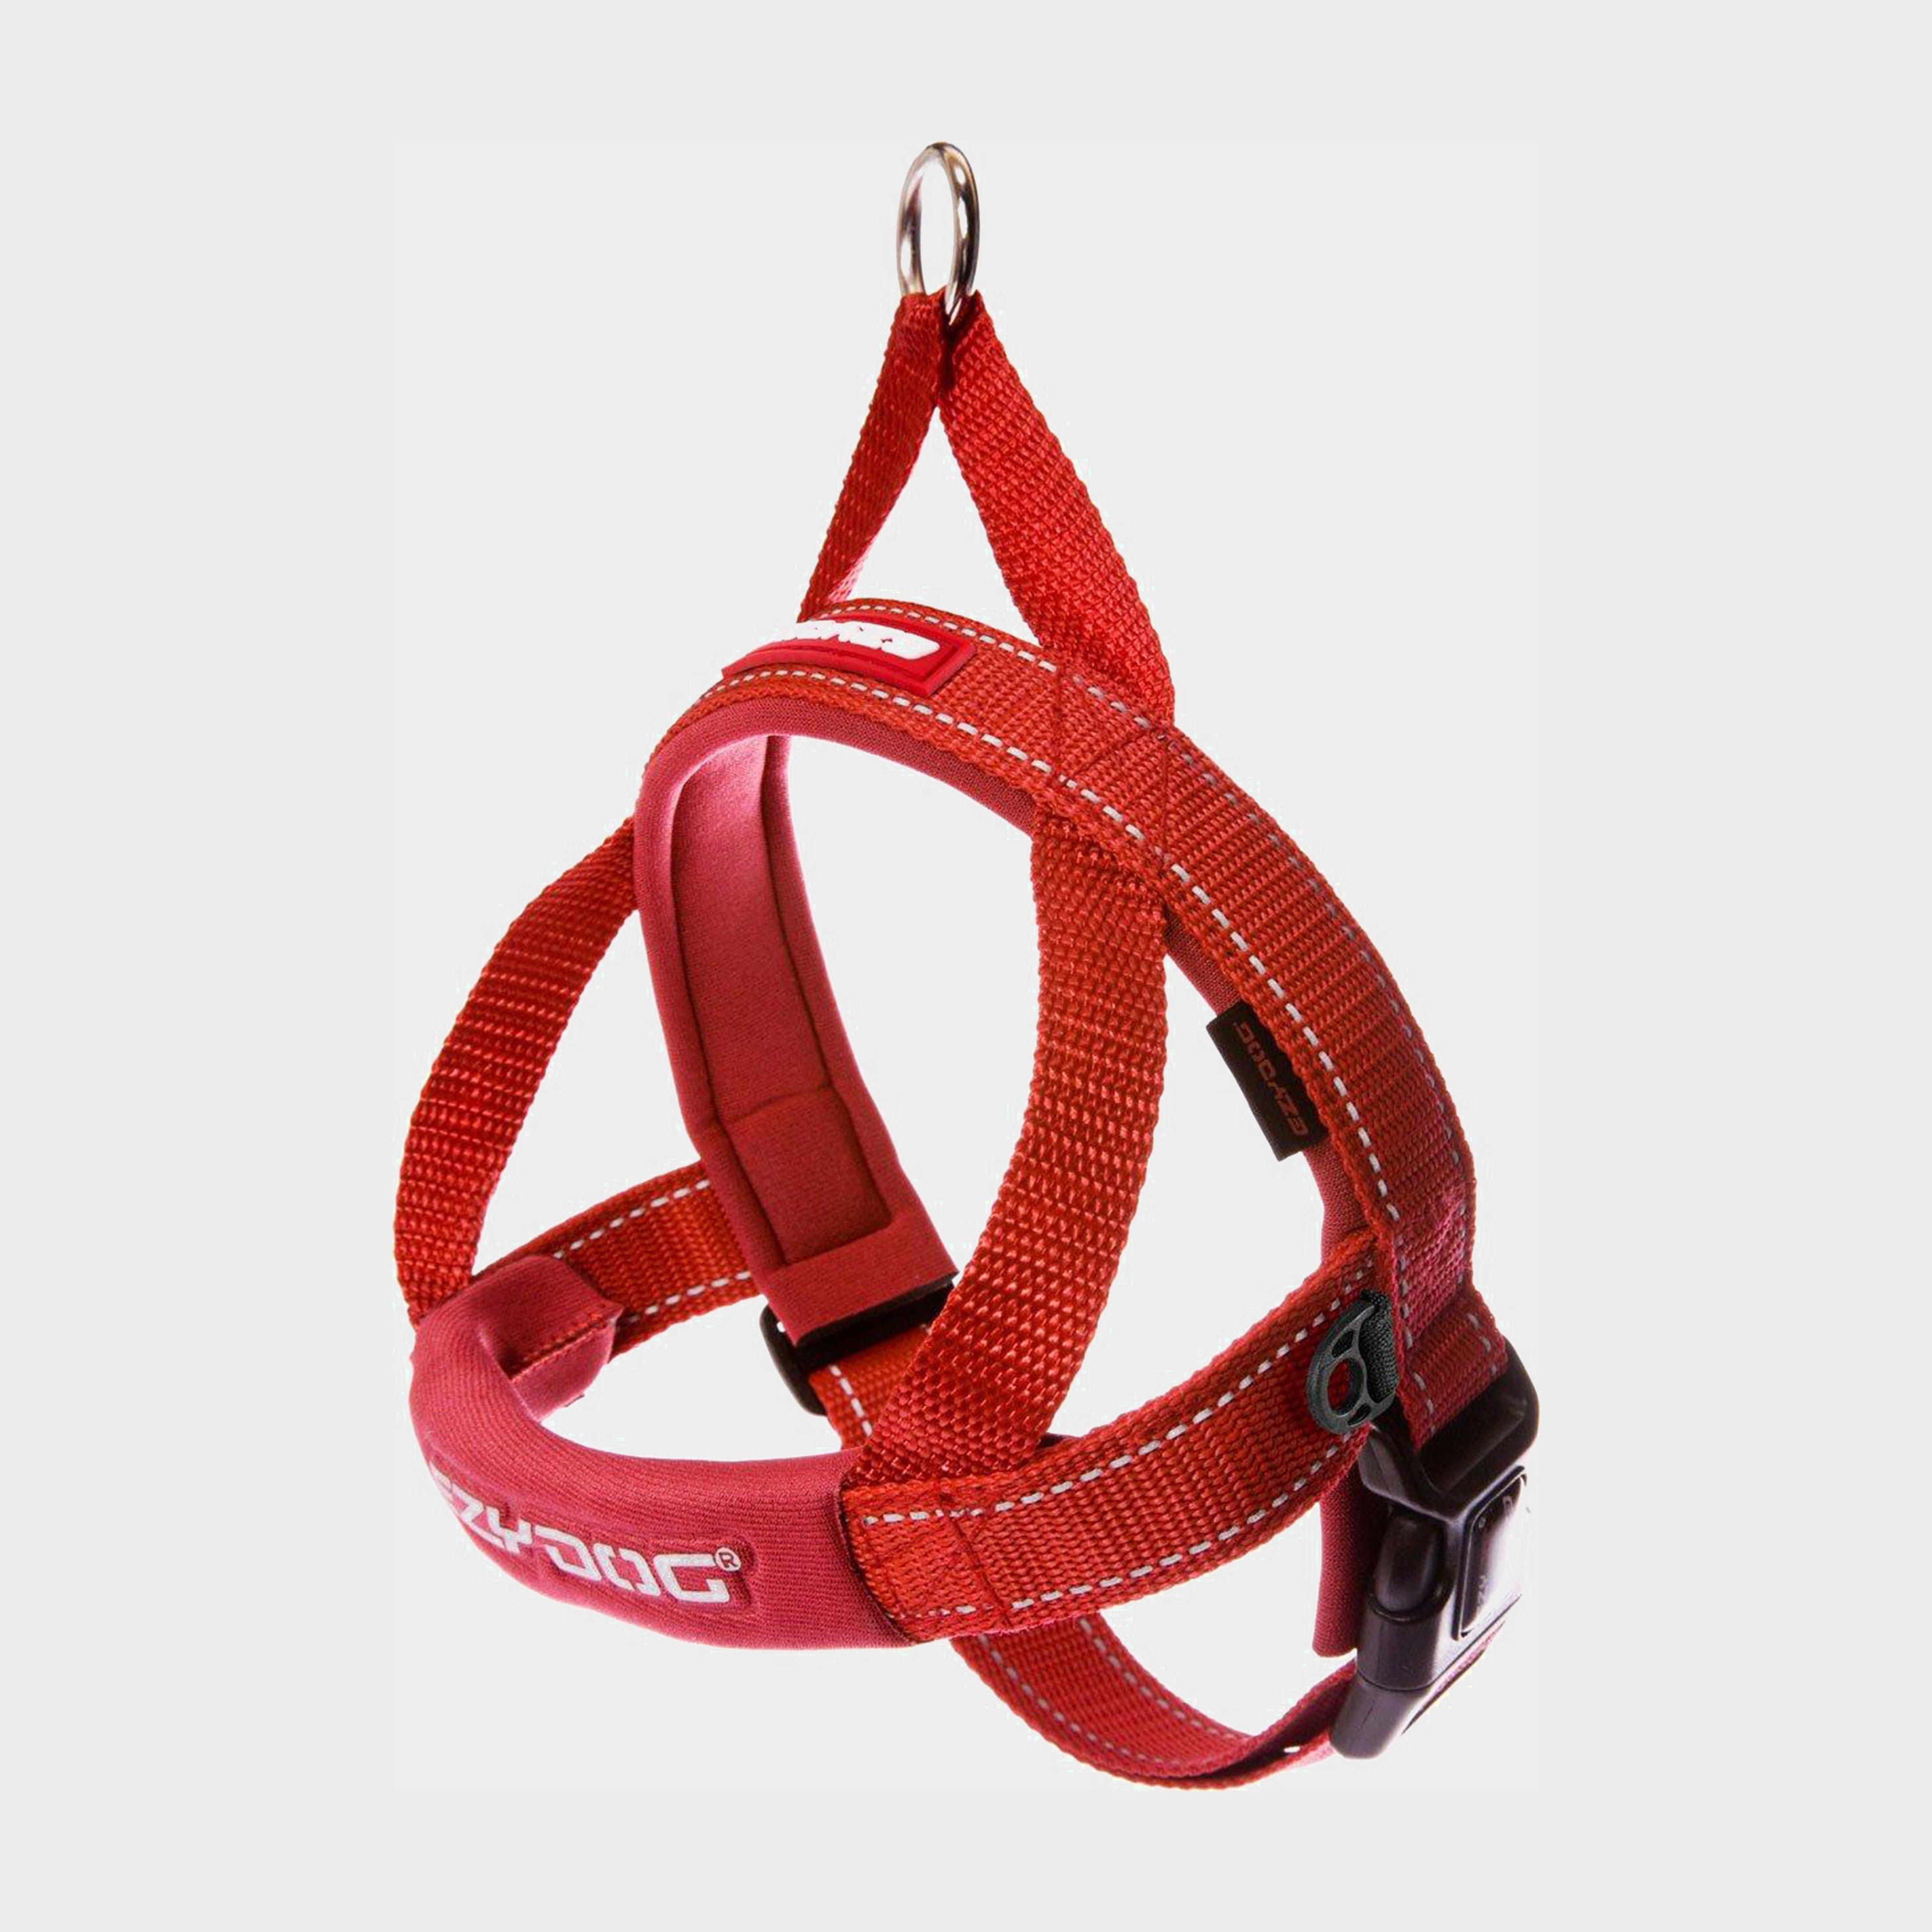 Ezy-dog Quick Fit Dog Harness (large) - Red/harness  Red/harness